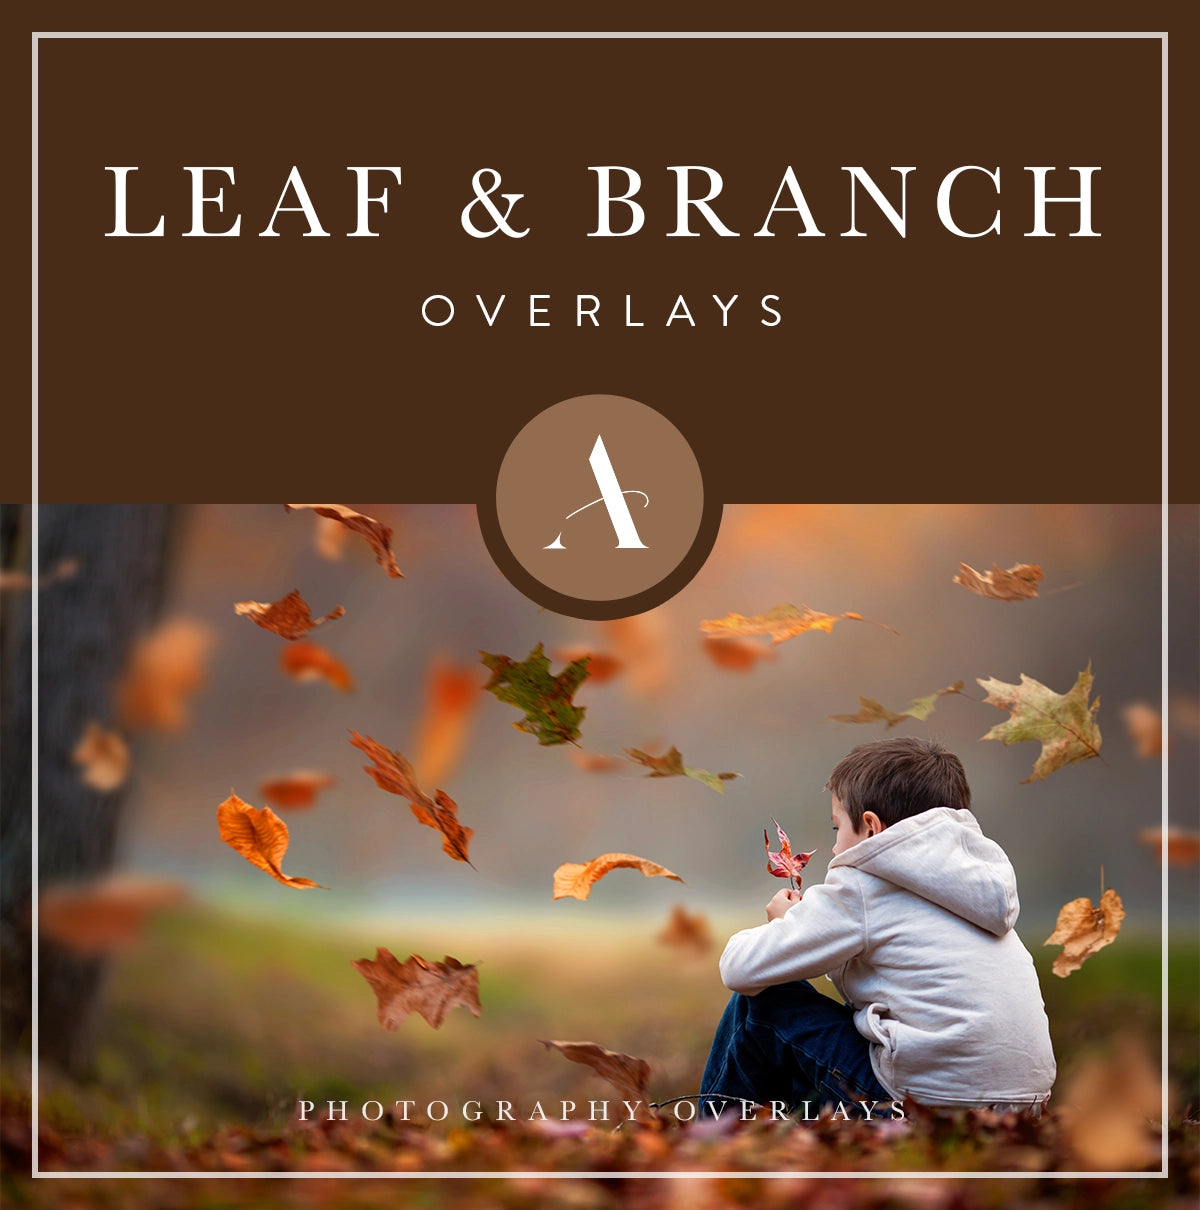 leaf and branch overlays for photoshop, photo editing, digital photography and photographers